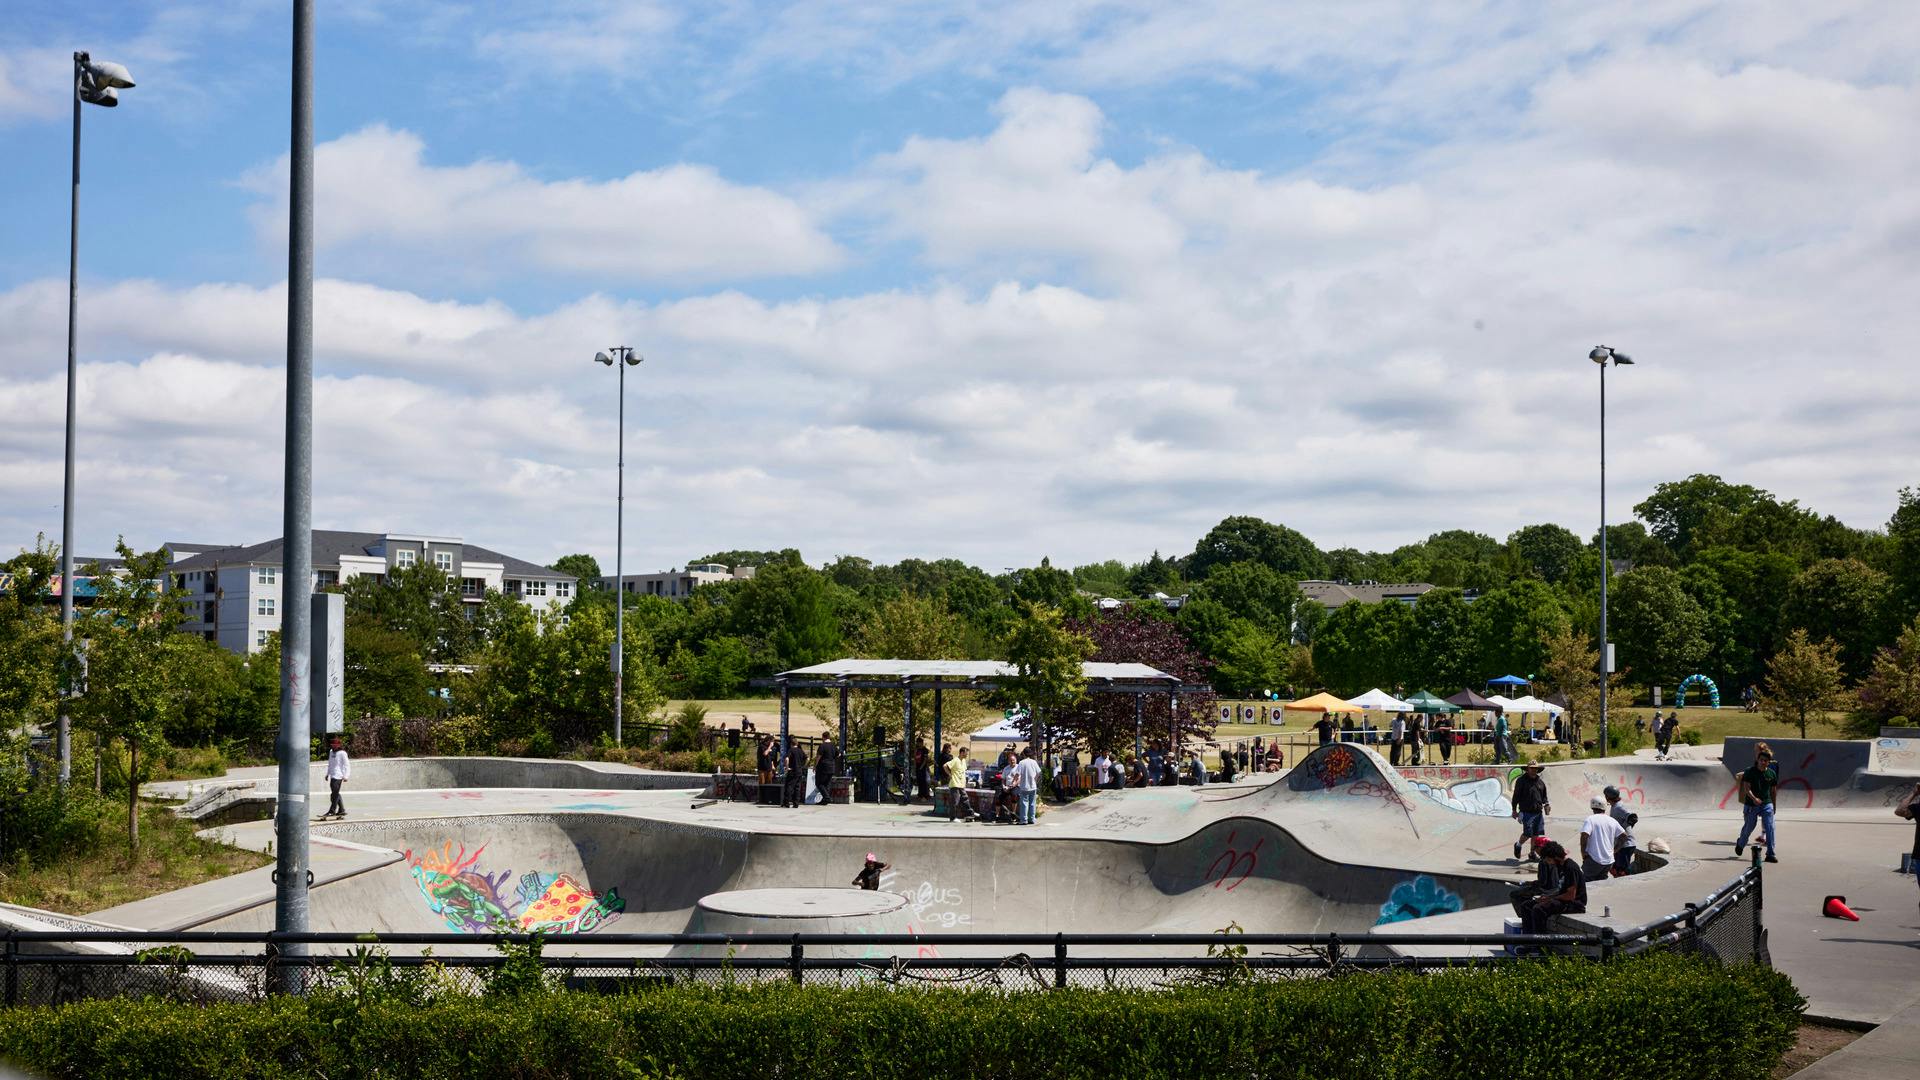 A skate park with people performing tricks on skateboards.